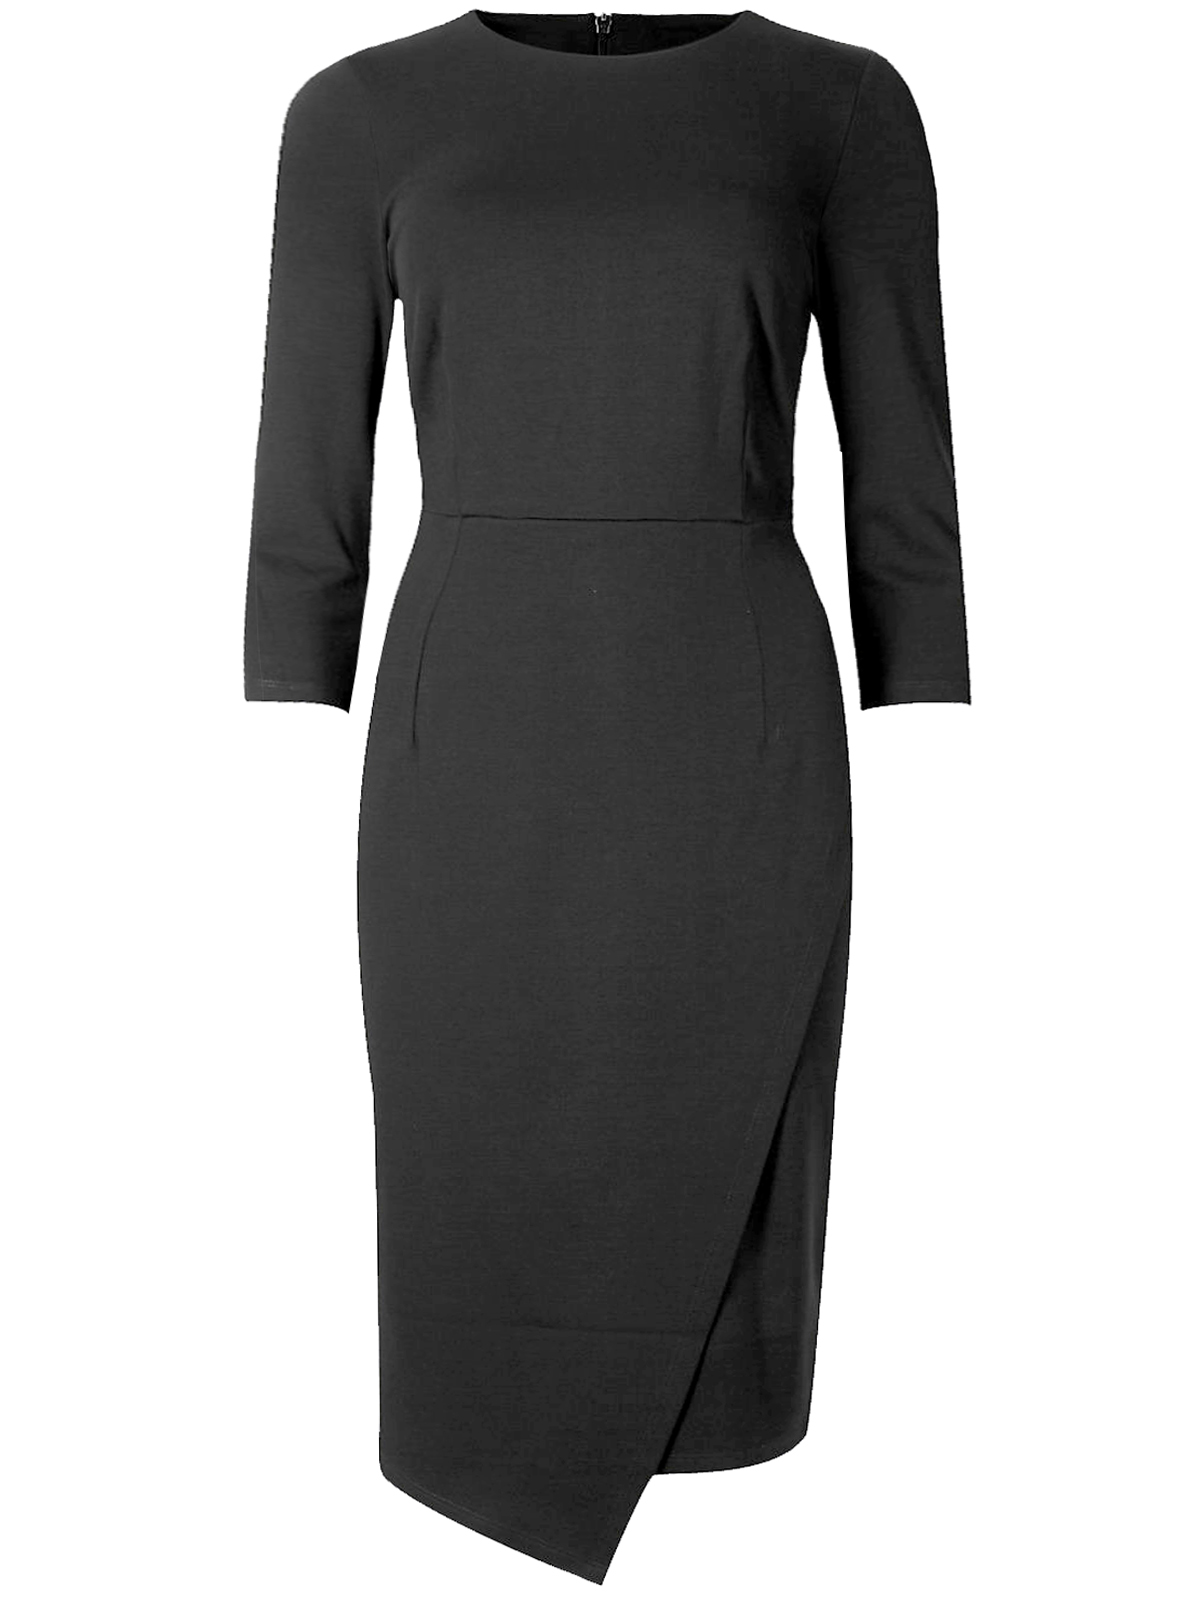 Marks and Spencer - - M&5 BLACK Mock Wrap 3/4 Sleeve Bodycon Dress ...